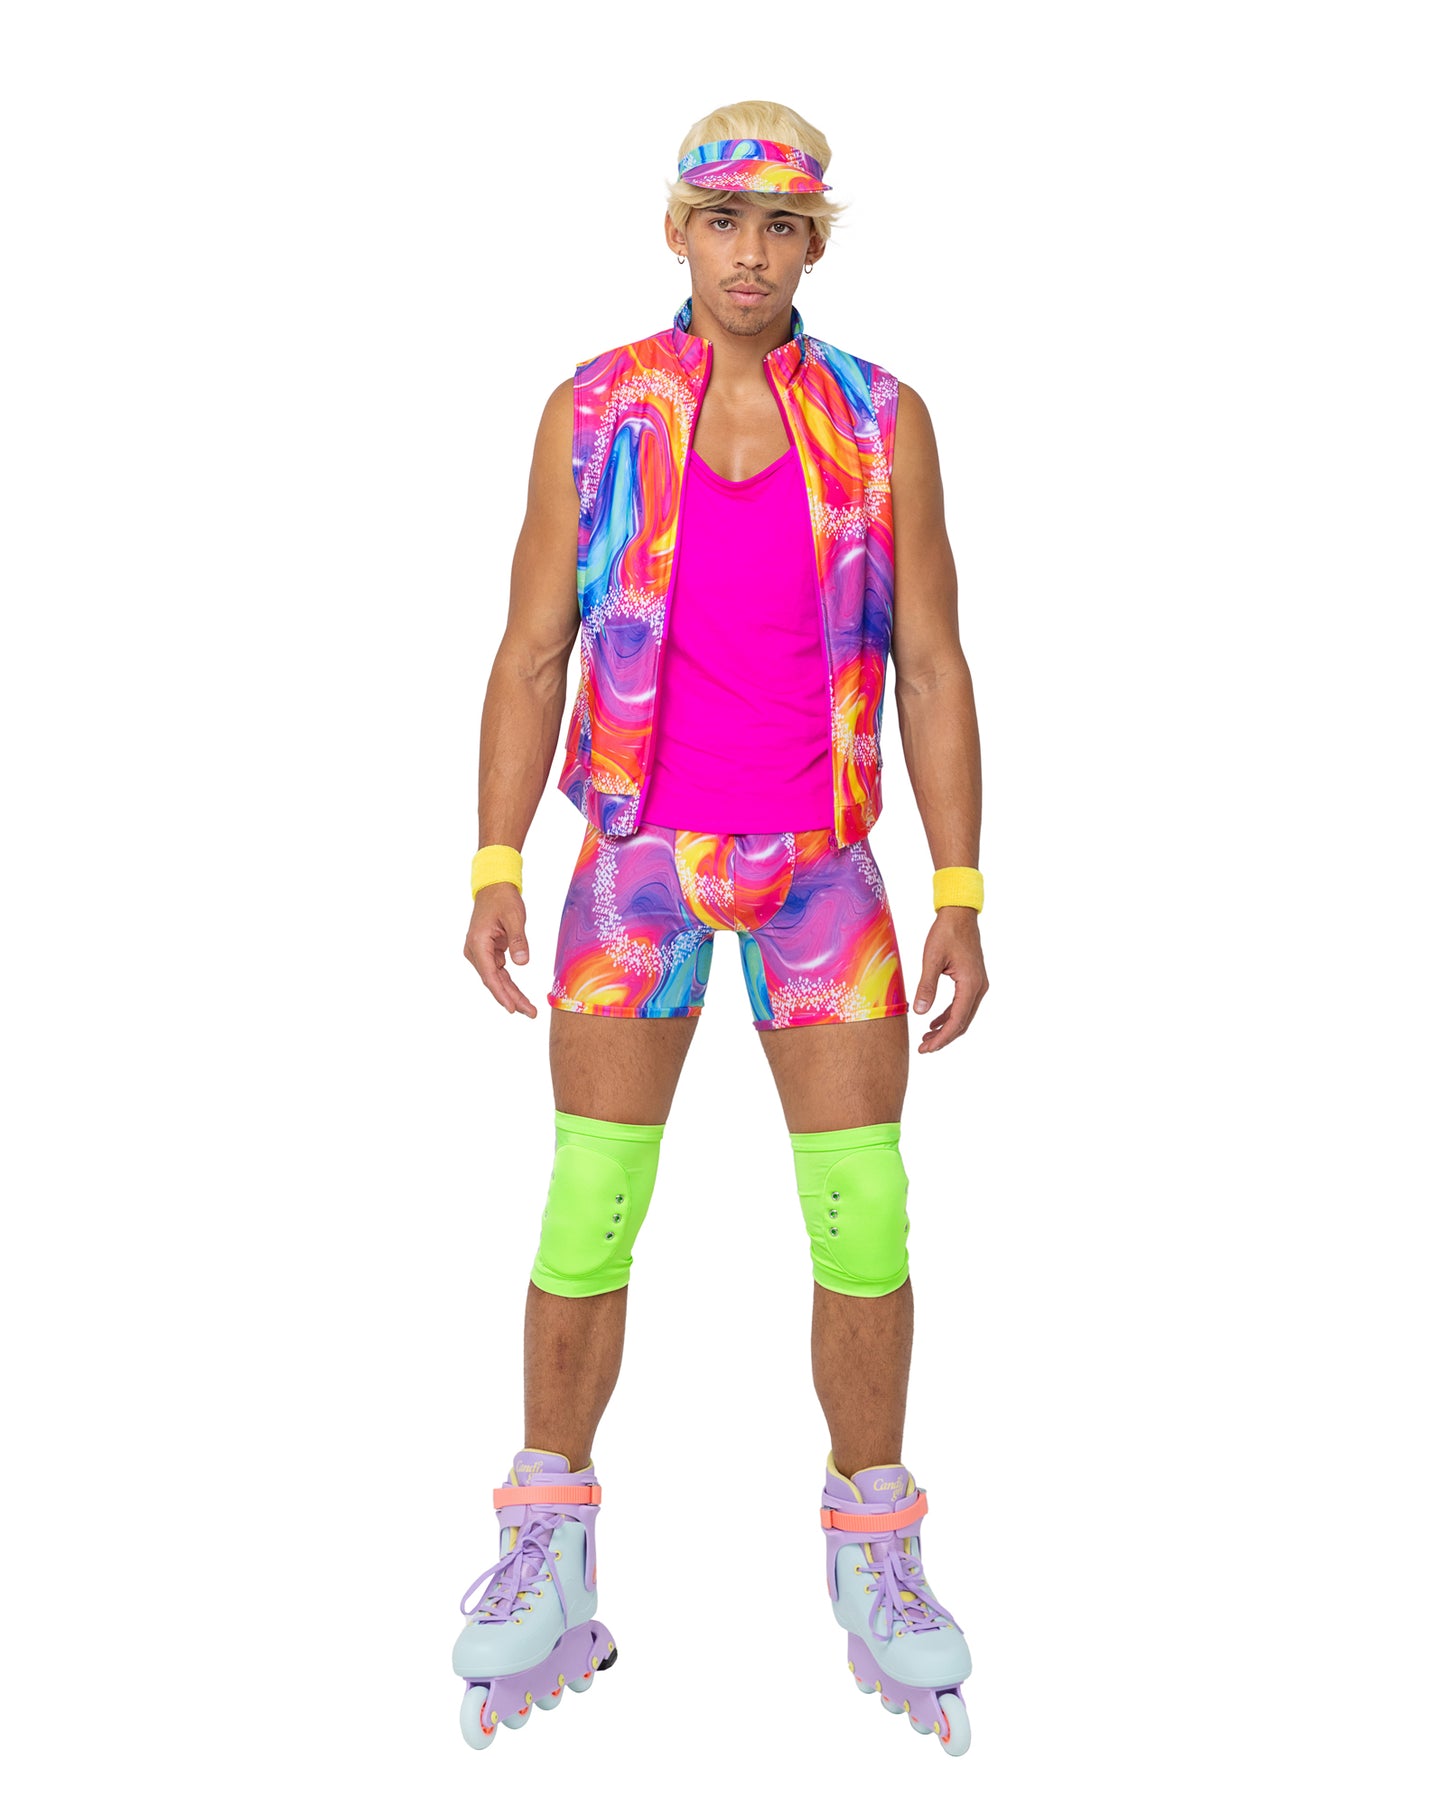 Rollerblade Ken Costume by ROMA in Size S, M, L, or XL